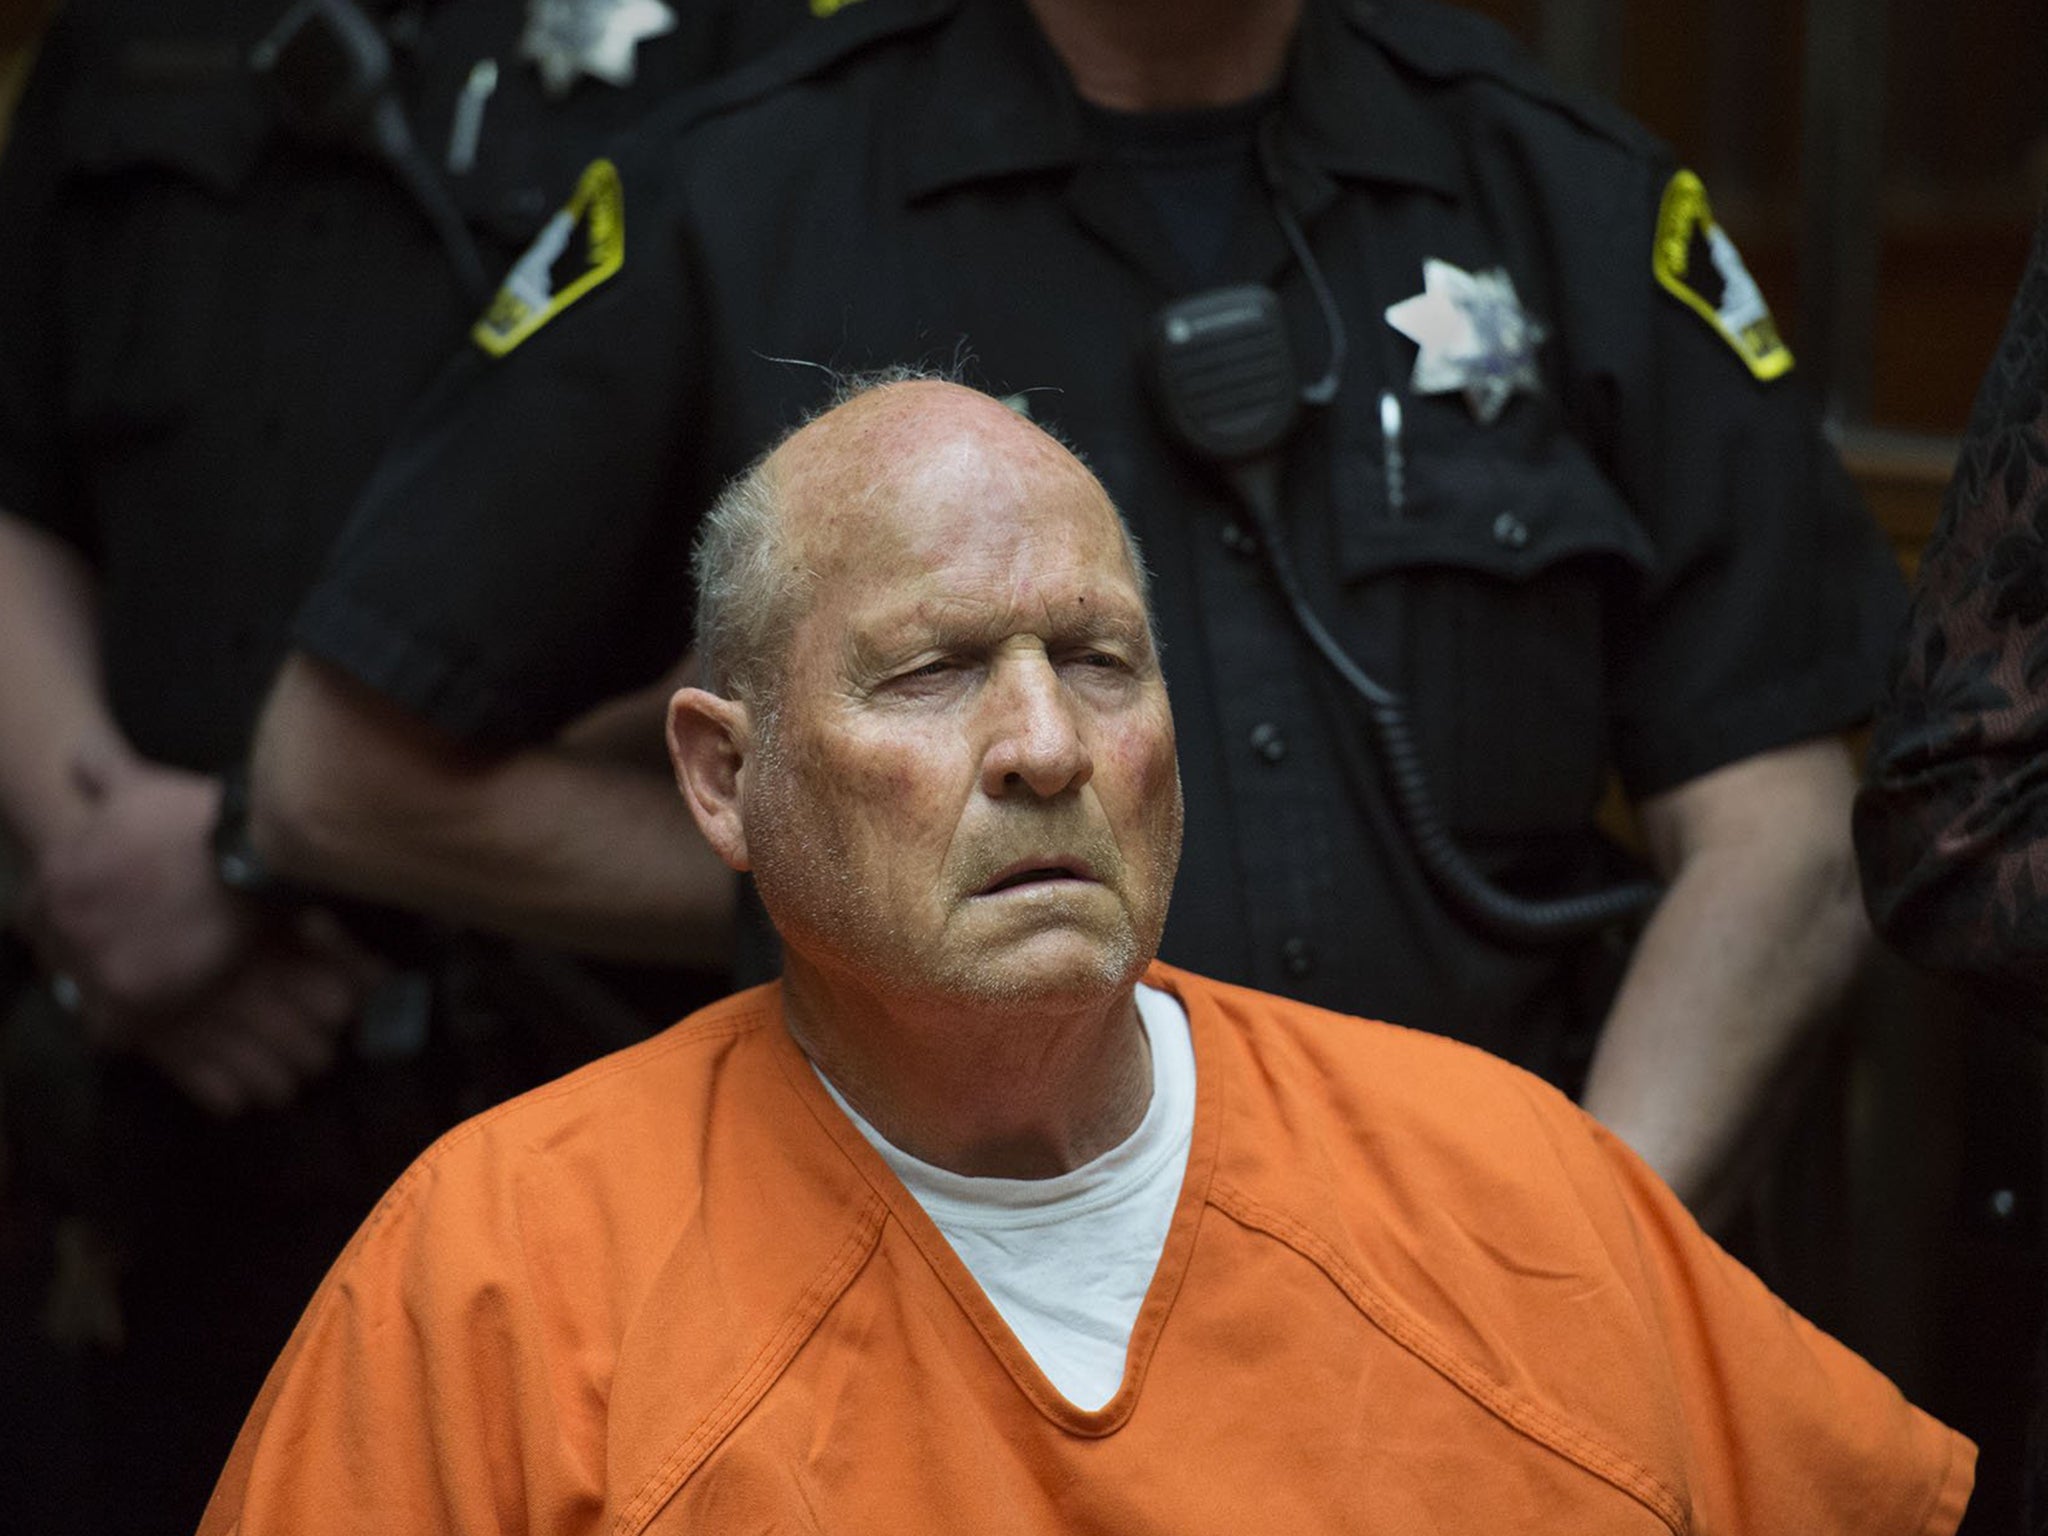 Golden State Killer suspect Joseph James DeAngelo was charged with 13 murders